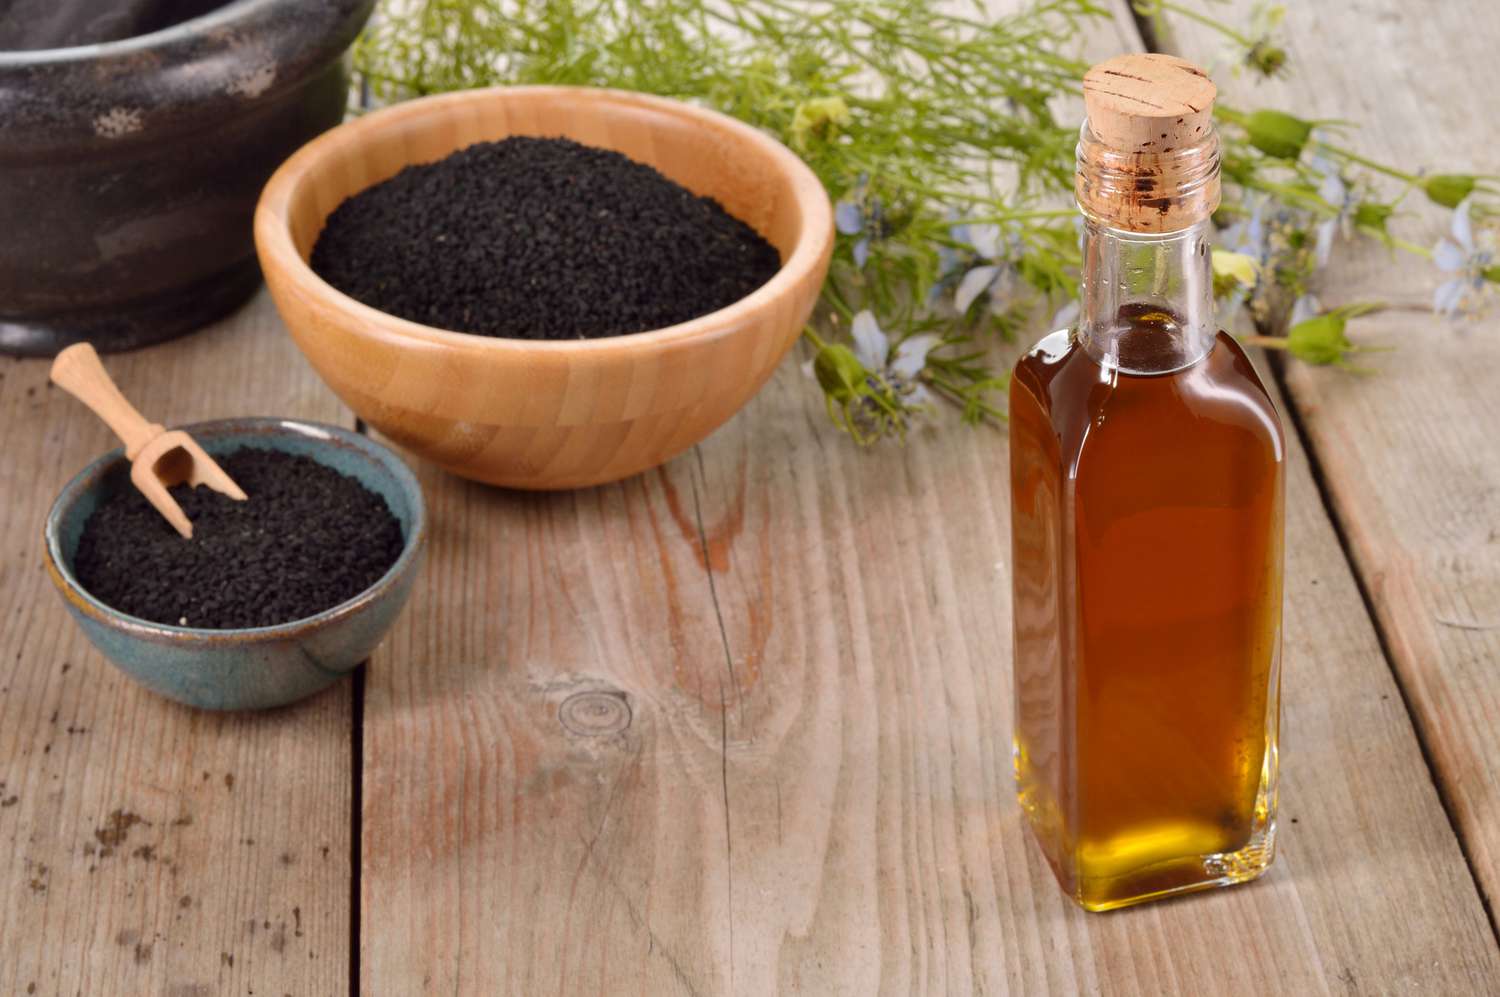 How Do You Make Black Seed Oil